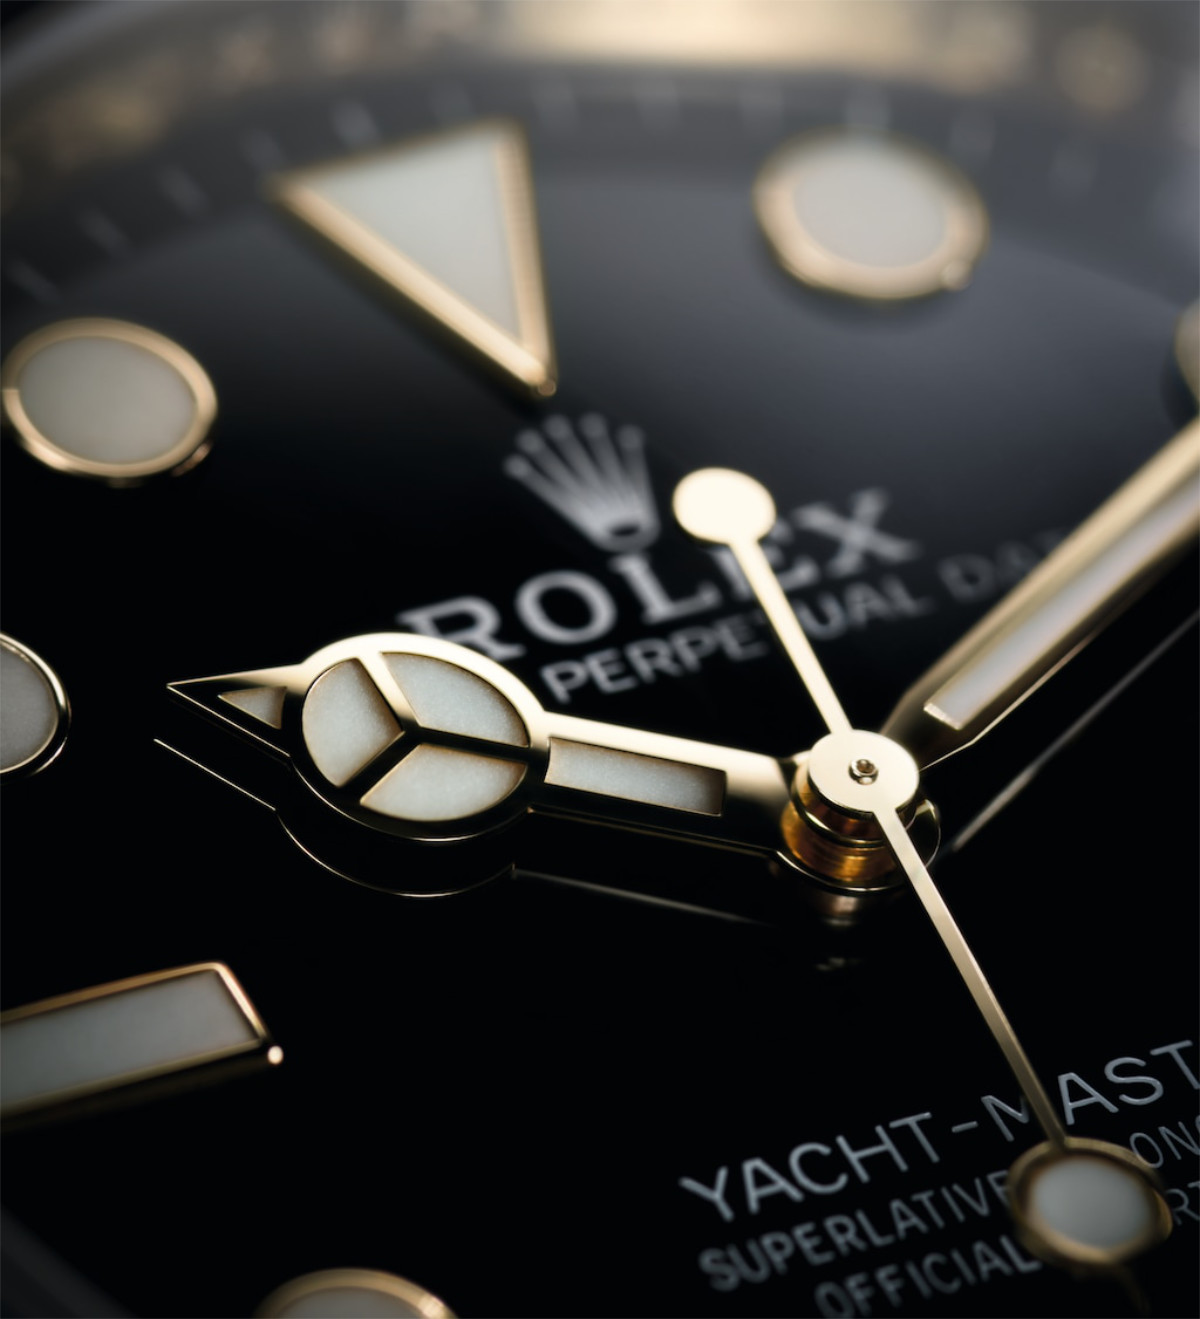 Rolex Presents New Oyster Perpetual Yacht-Master 42 Watch Of The Week: The  New Rolex Oyster Perpetual Yacht-Master 42 - Luxury Watch Trends 2018 -  Baselworld SIHH Watch News